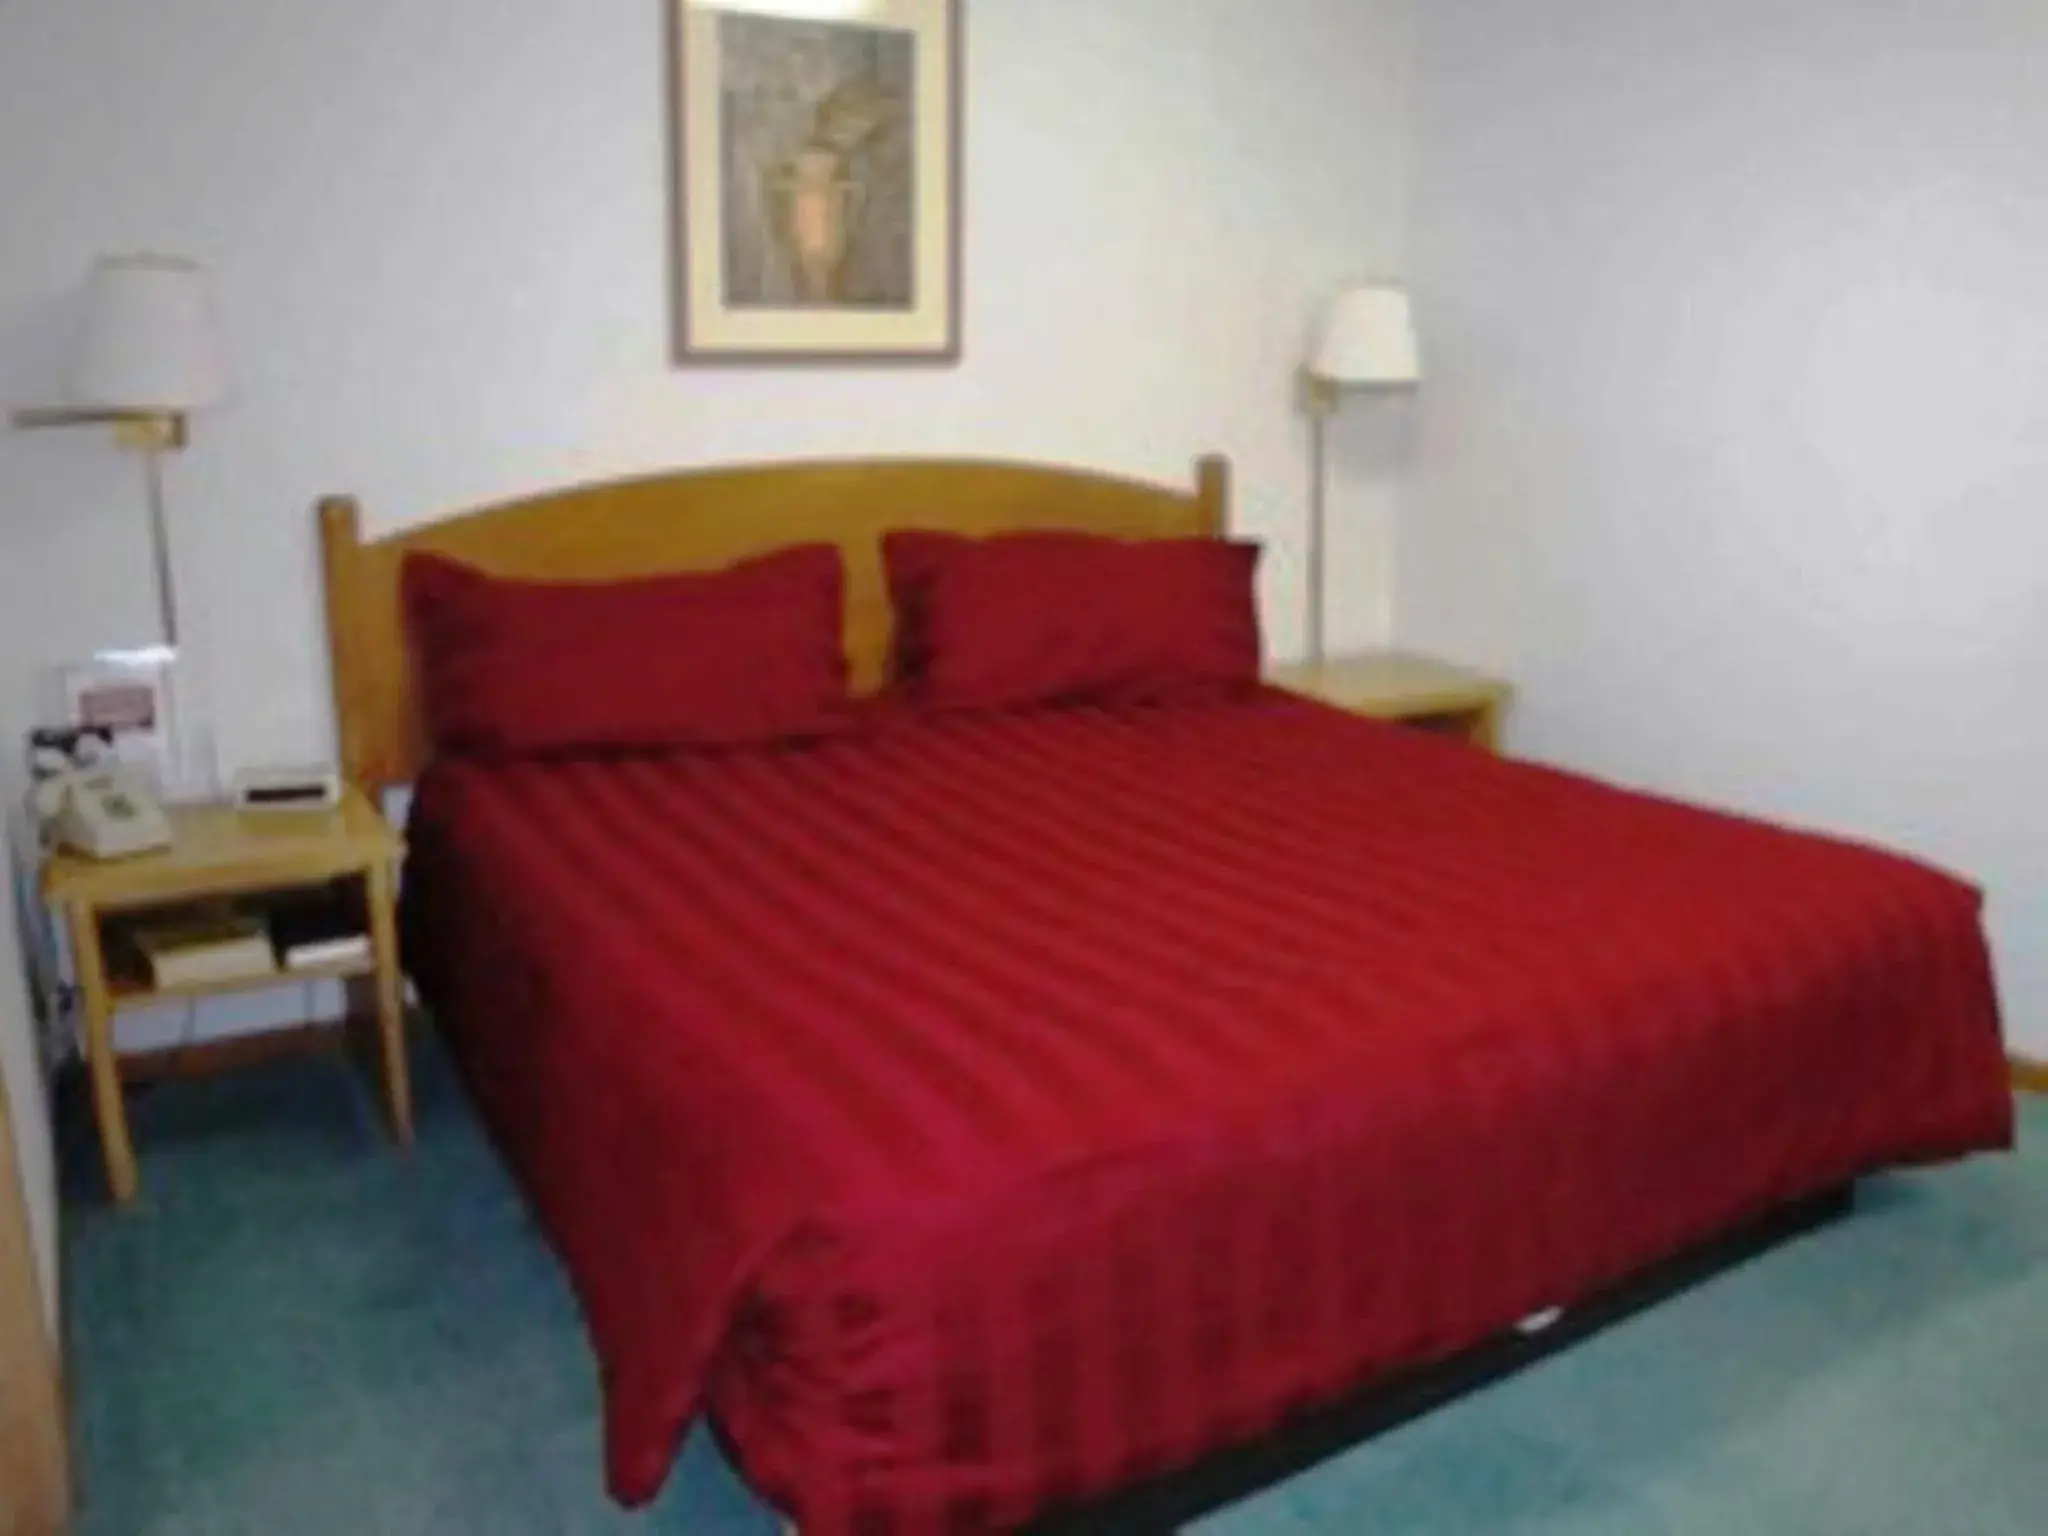 Bed in Red Carpet Motel - Knoxville